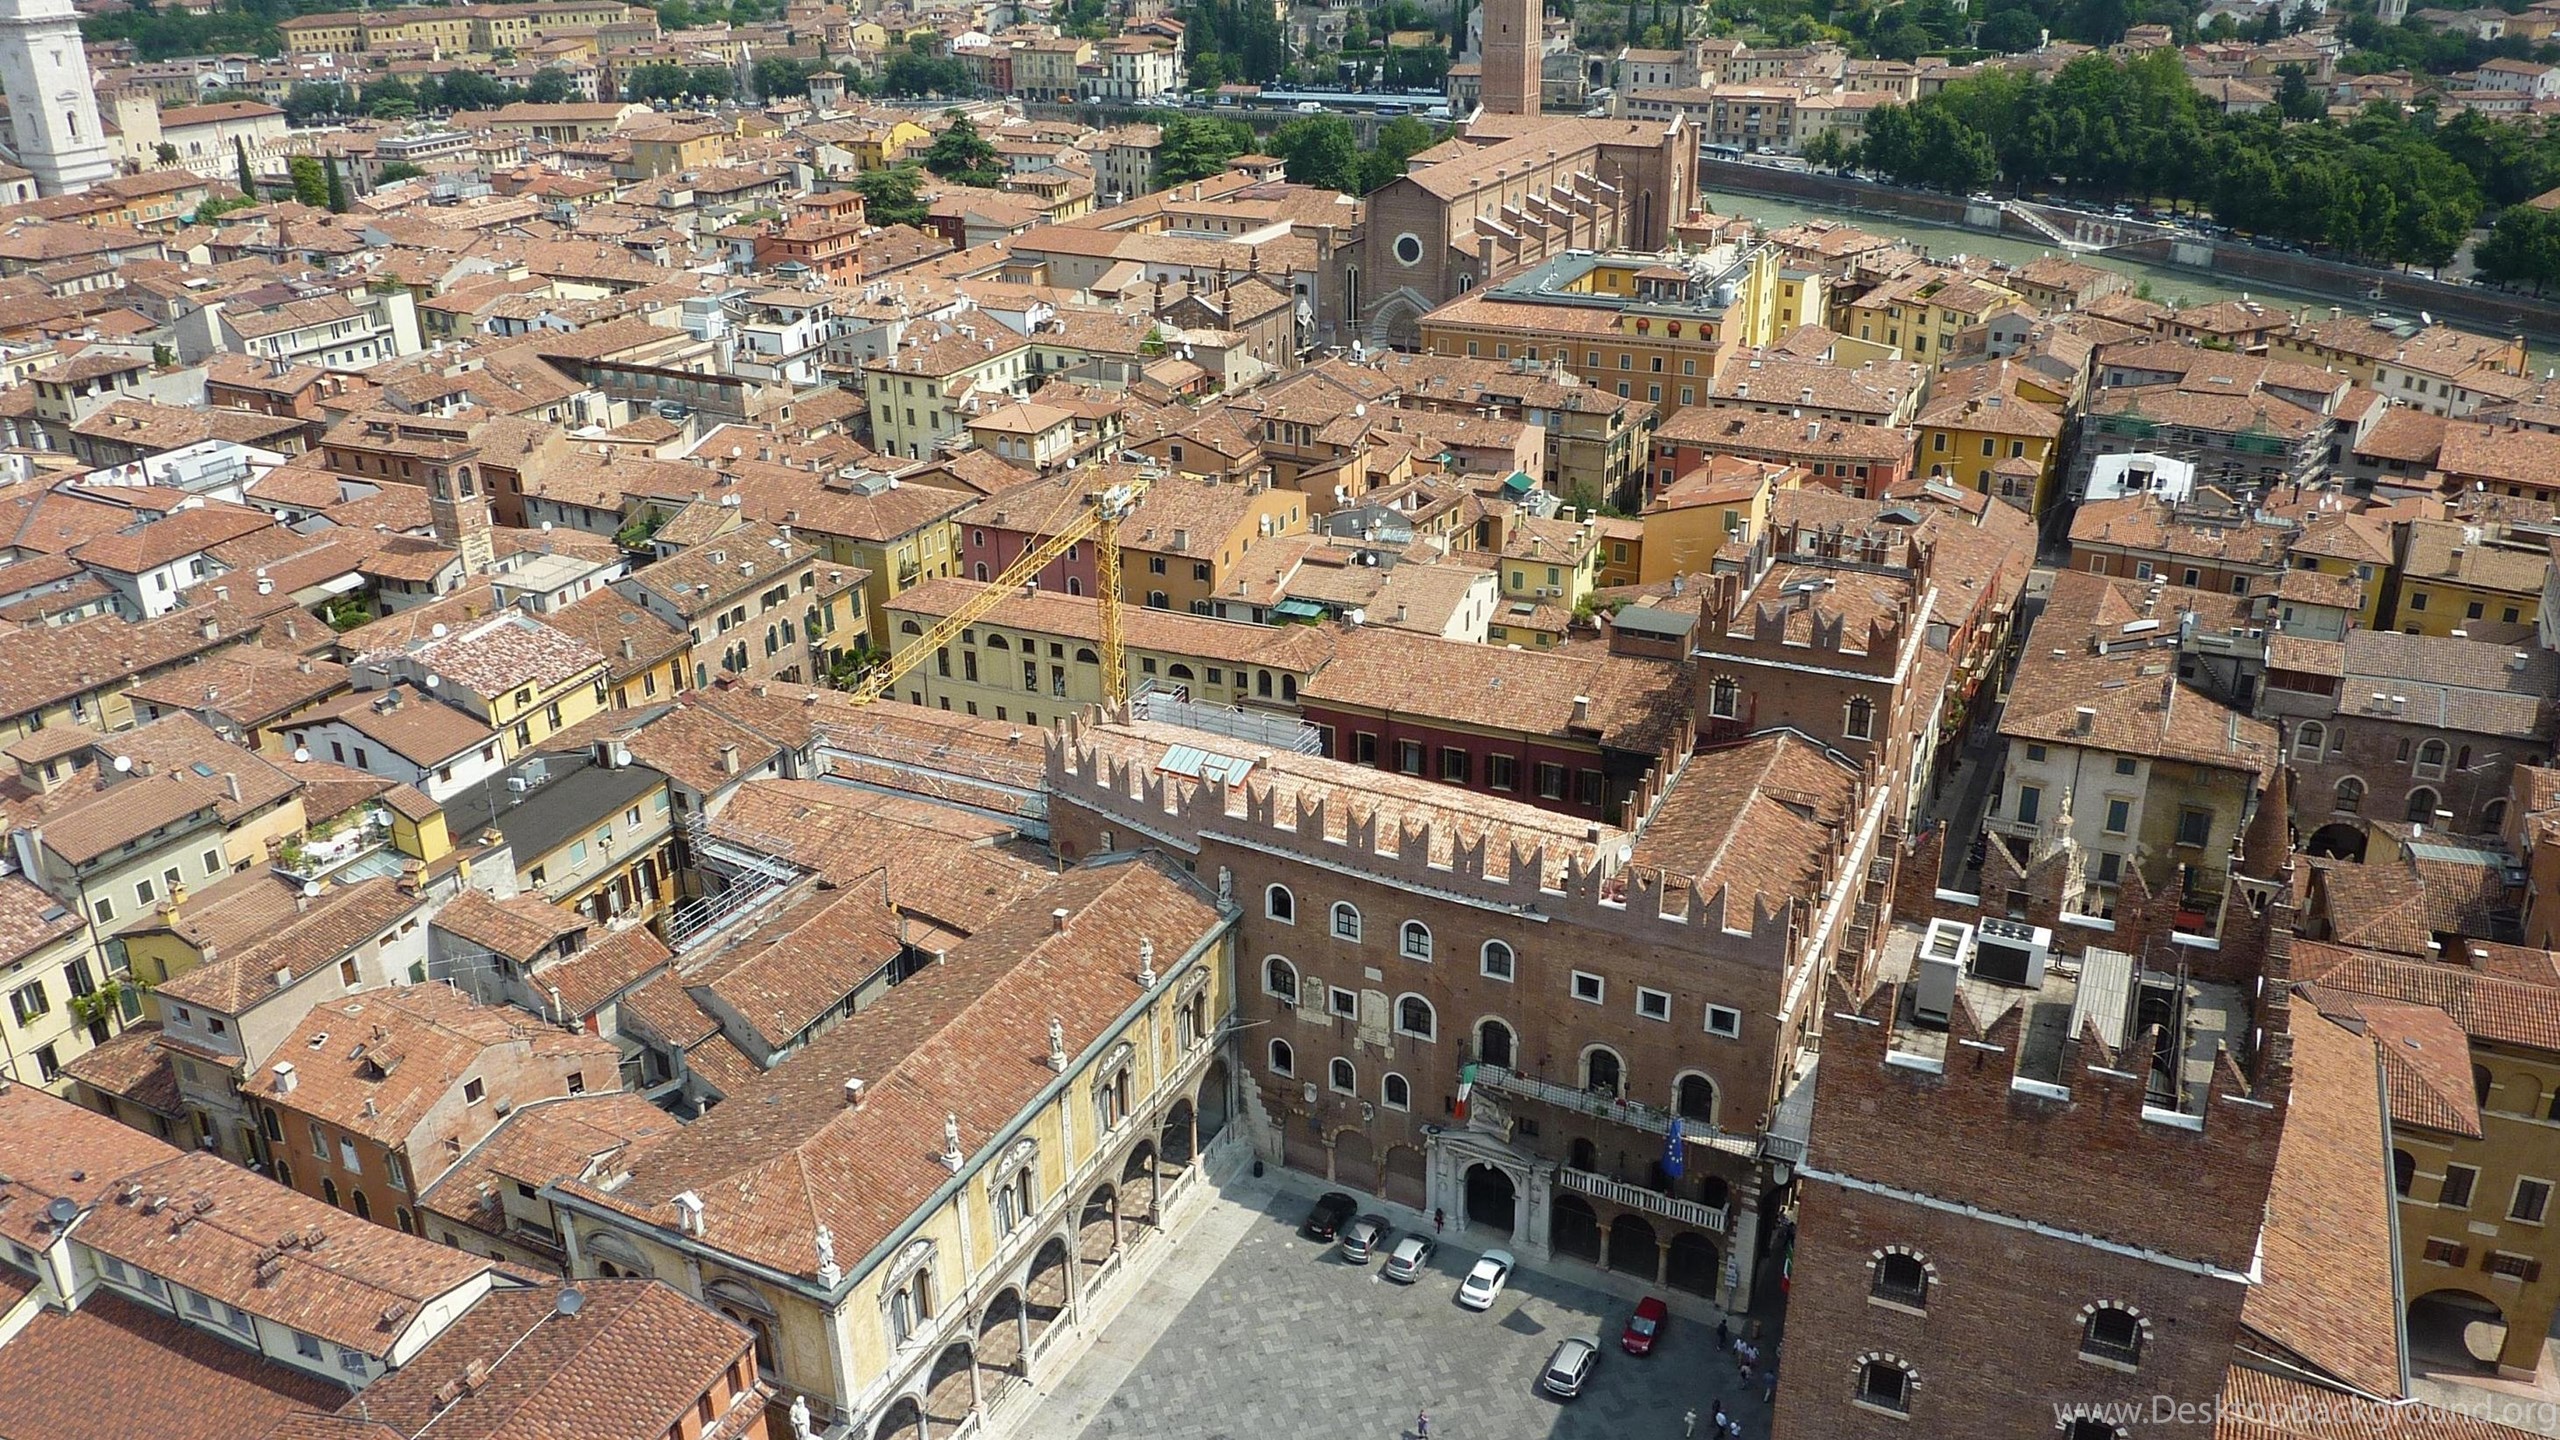 Panorama Of The City Of Verona, Italy Wallpapers And Wallpaper